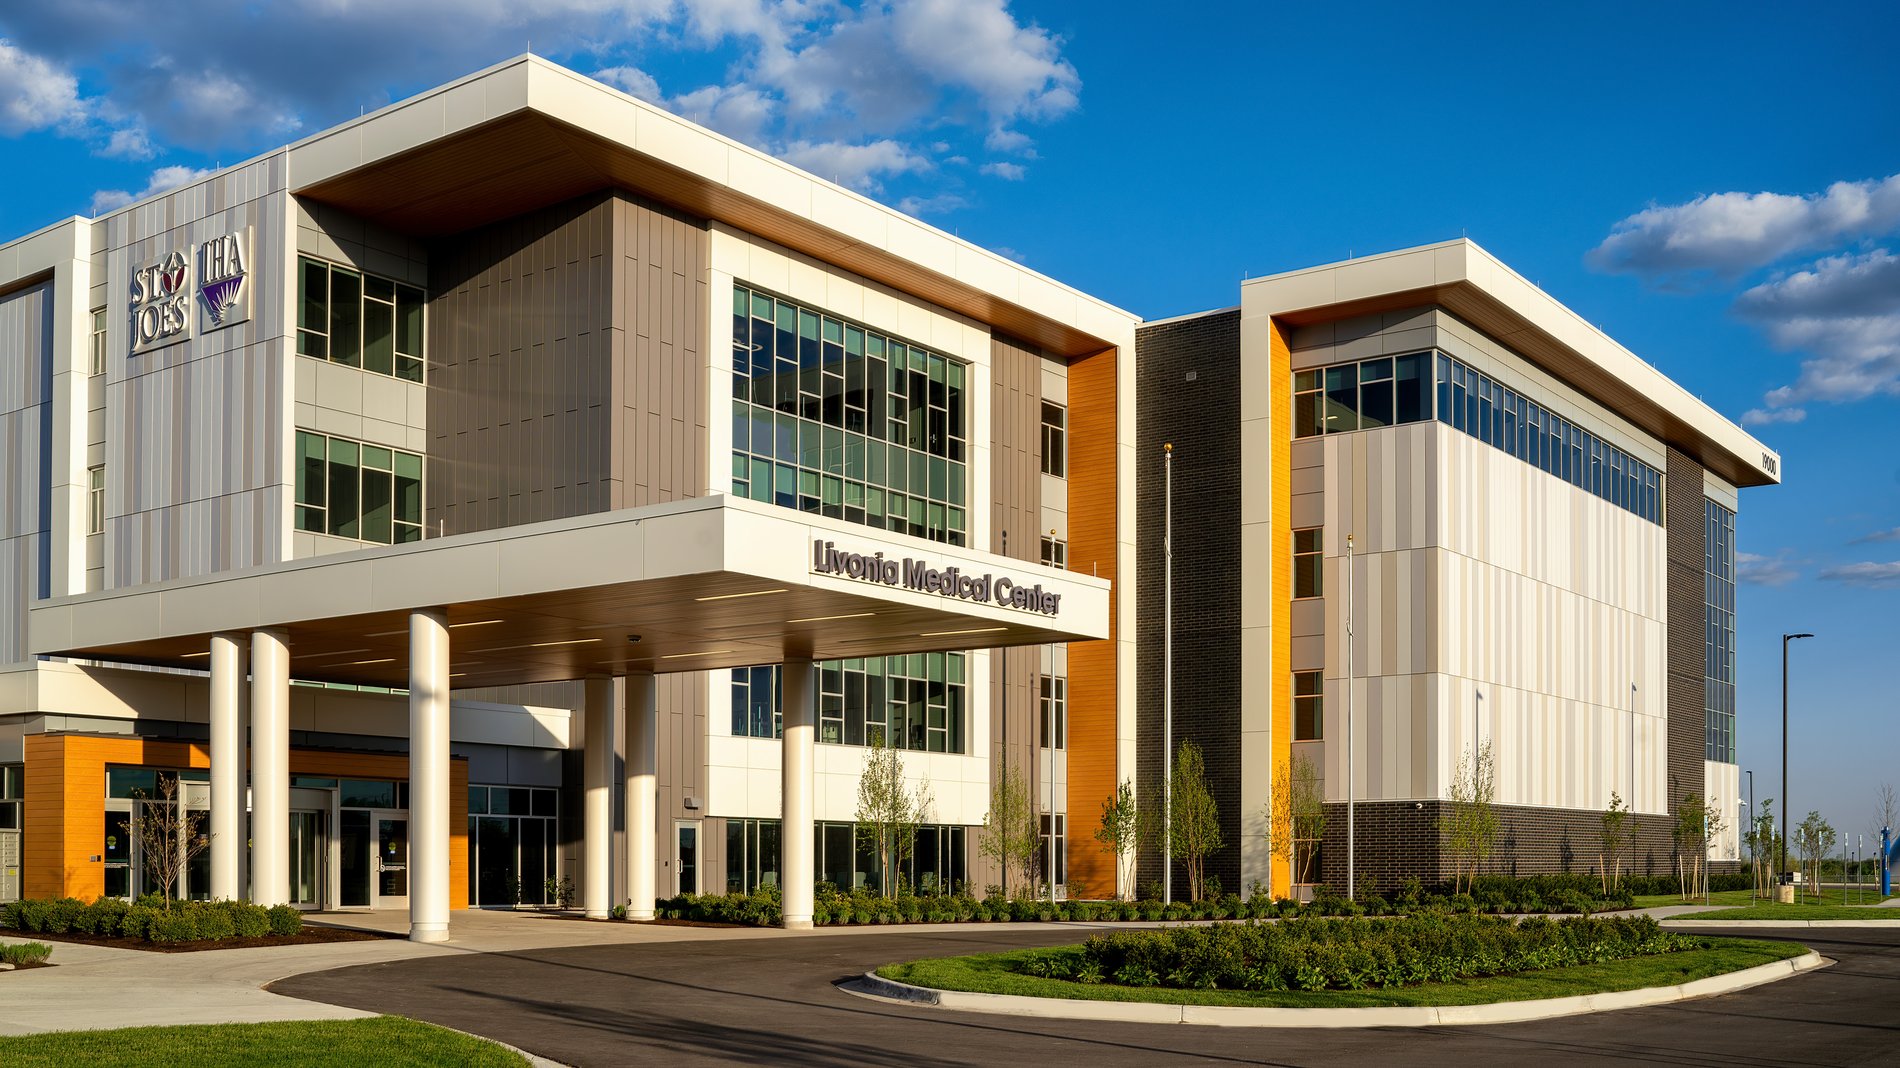 Trinity Health IHA Medical Group, Primary Care - Schoolcraft Campus is located in the Livonia Medical Center of Schoolcraft College.